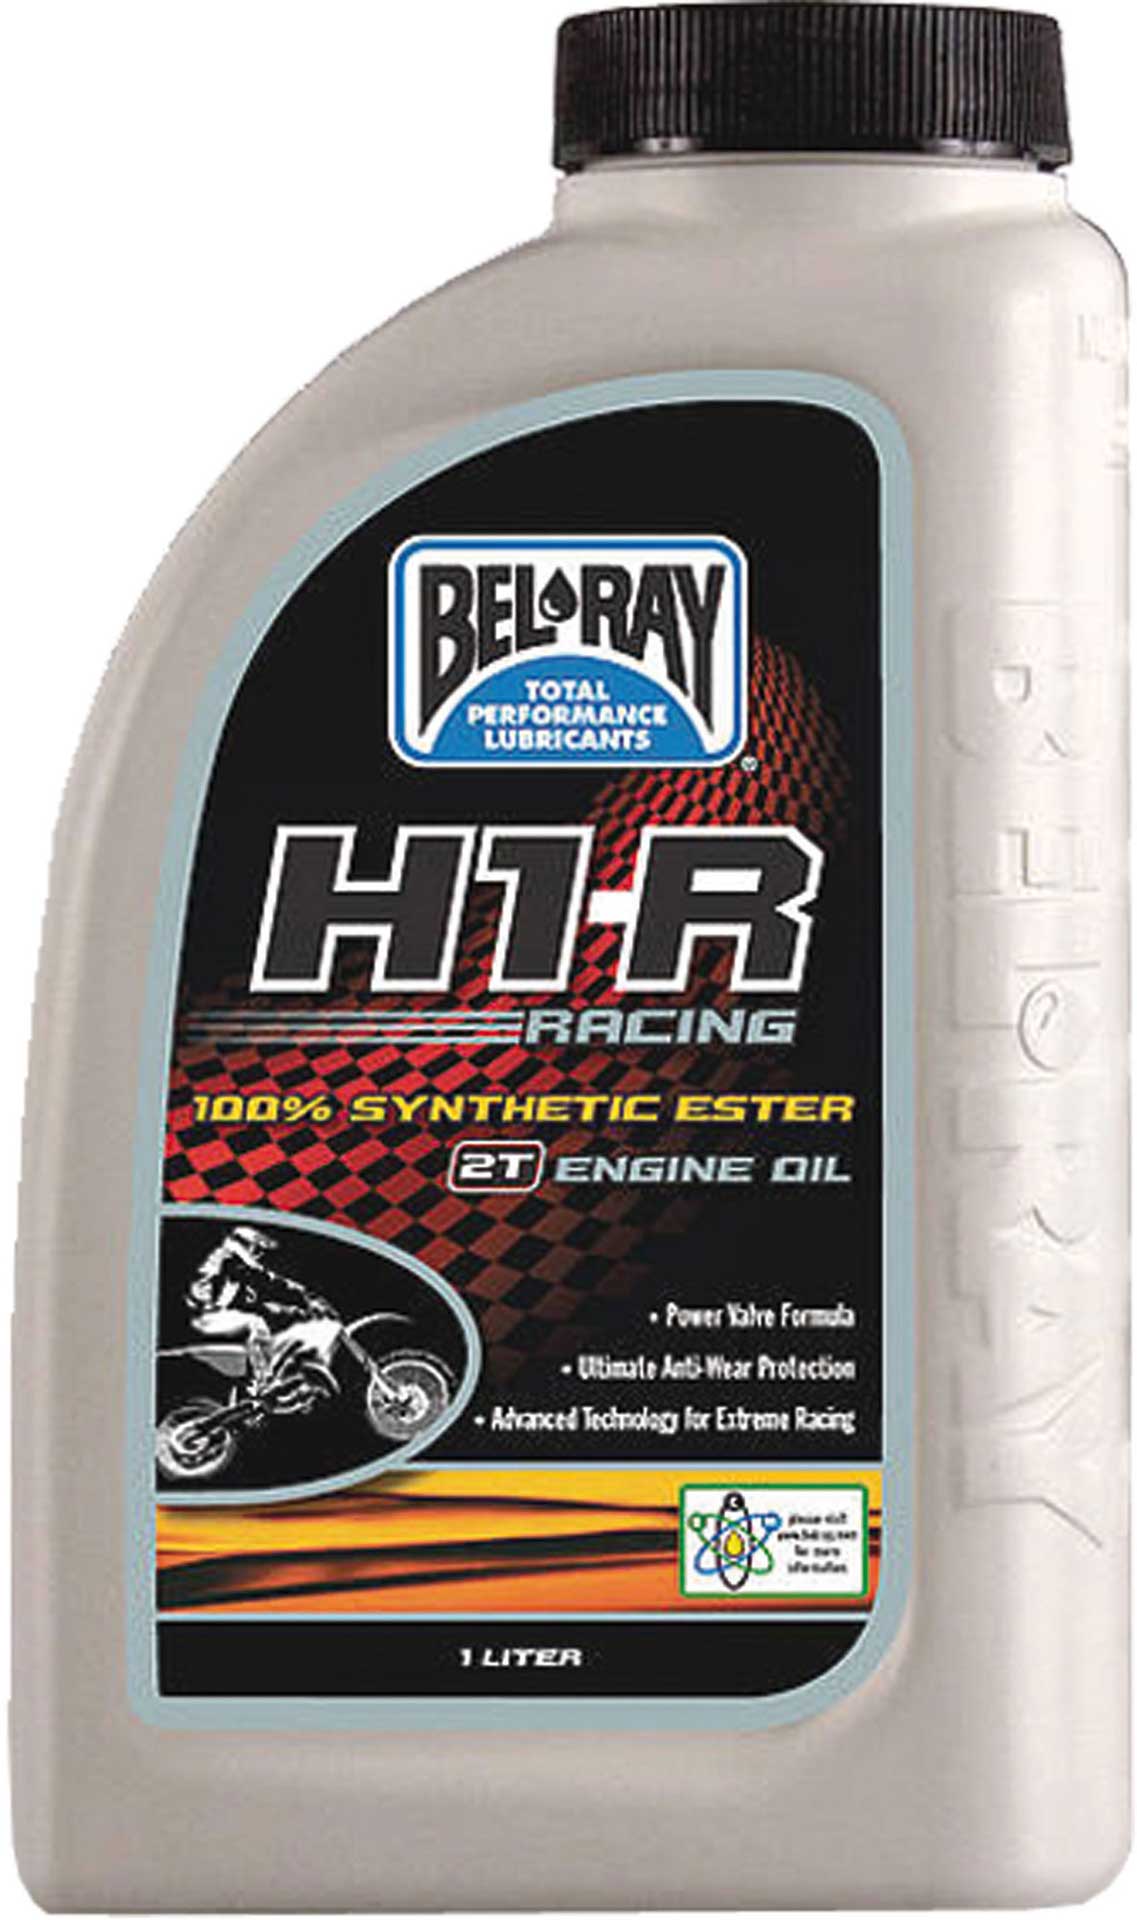 BEL-RAY H-1-R 2-STROKE RACING ESTER OIL FOR MIXED LUBRICATION, NOT SUITABLE FOR